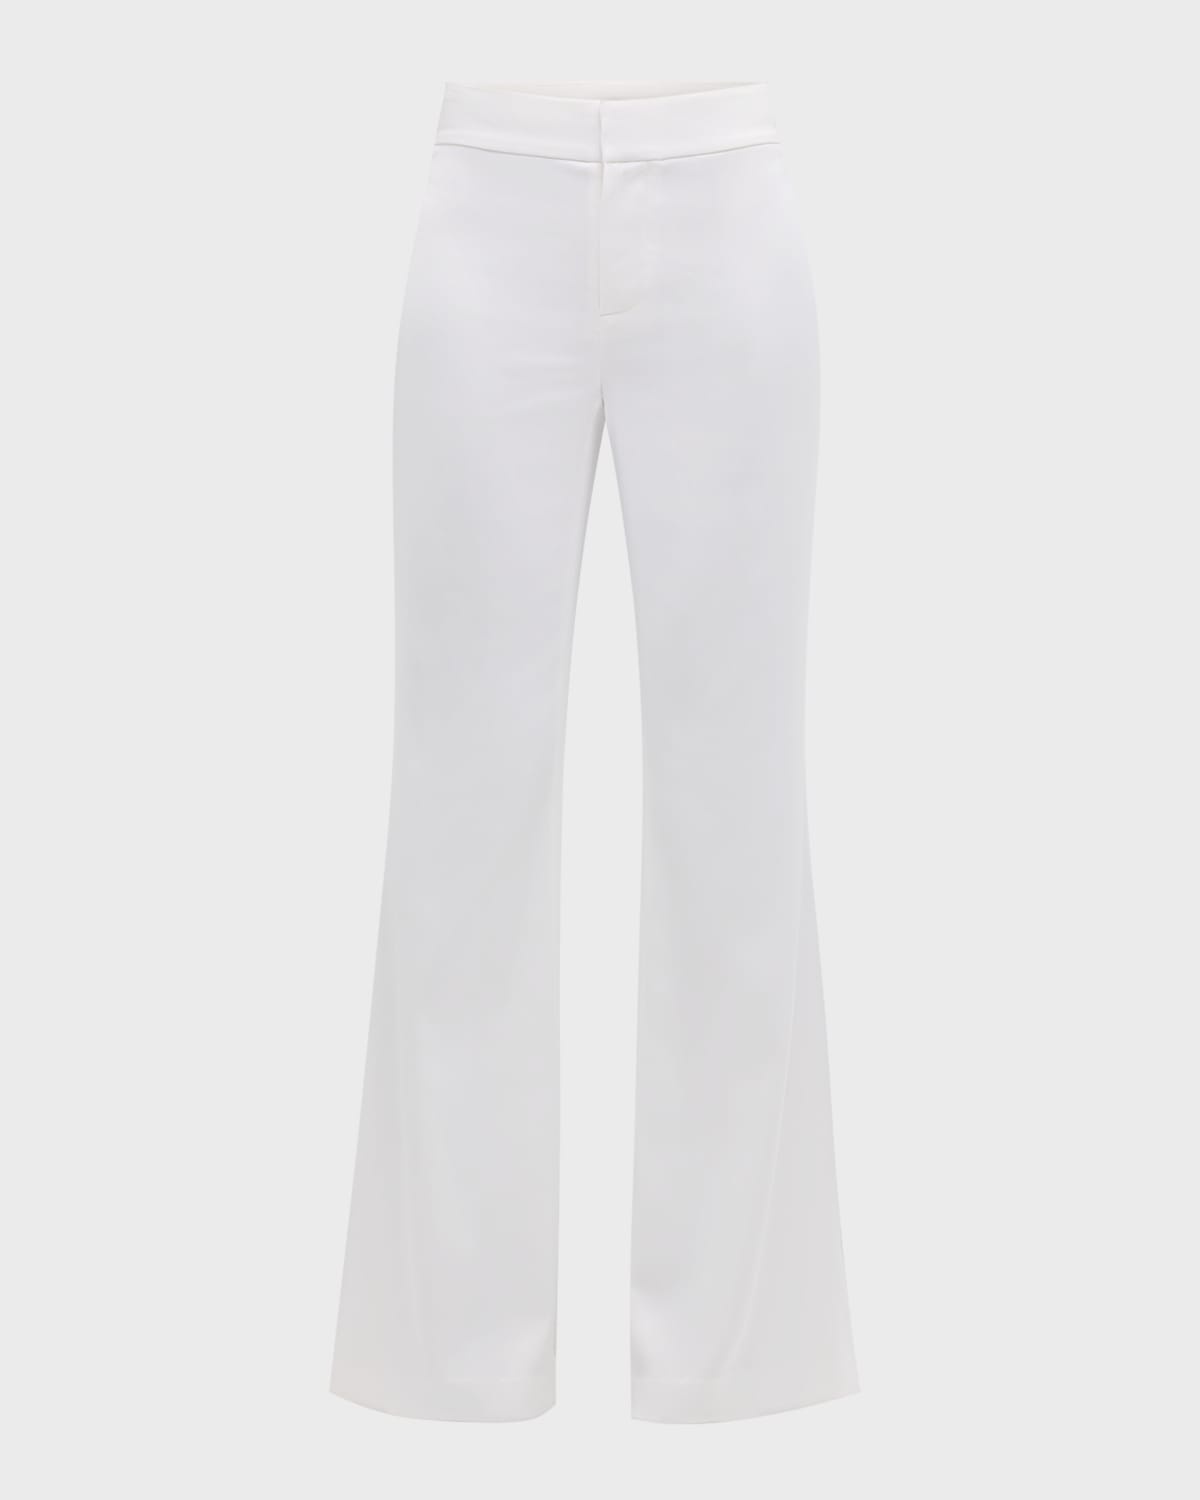 Andrew Mid-Rise Bootcut Pants - 1